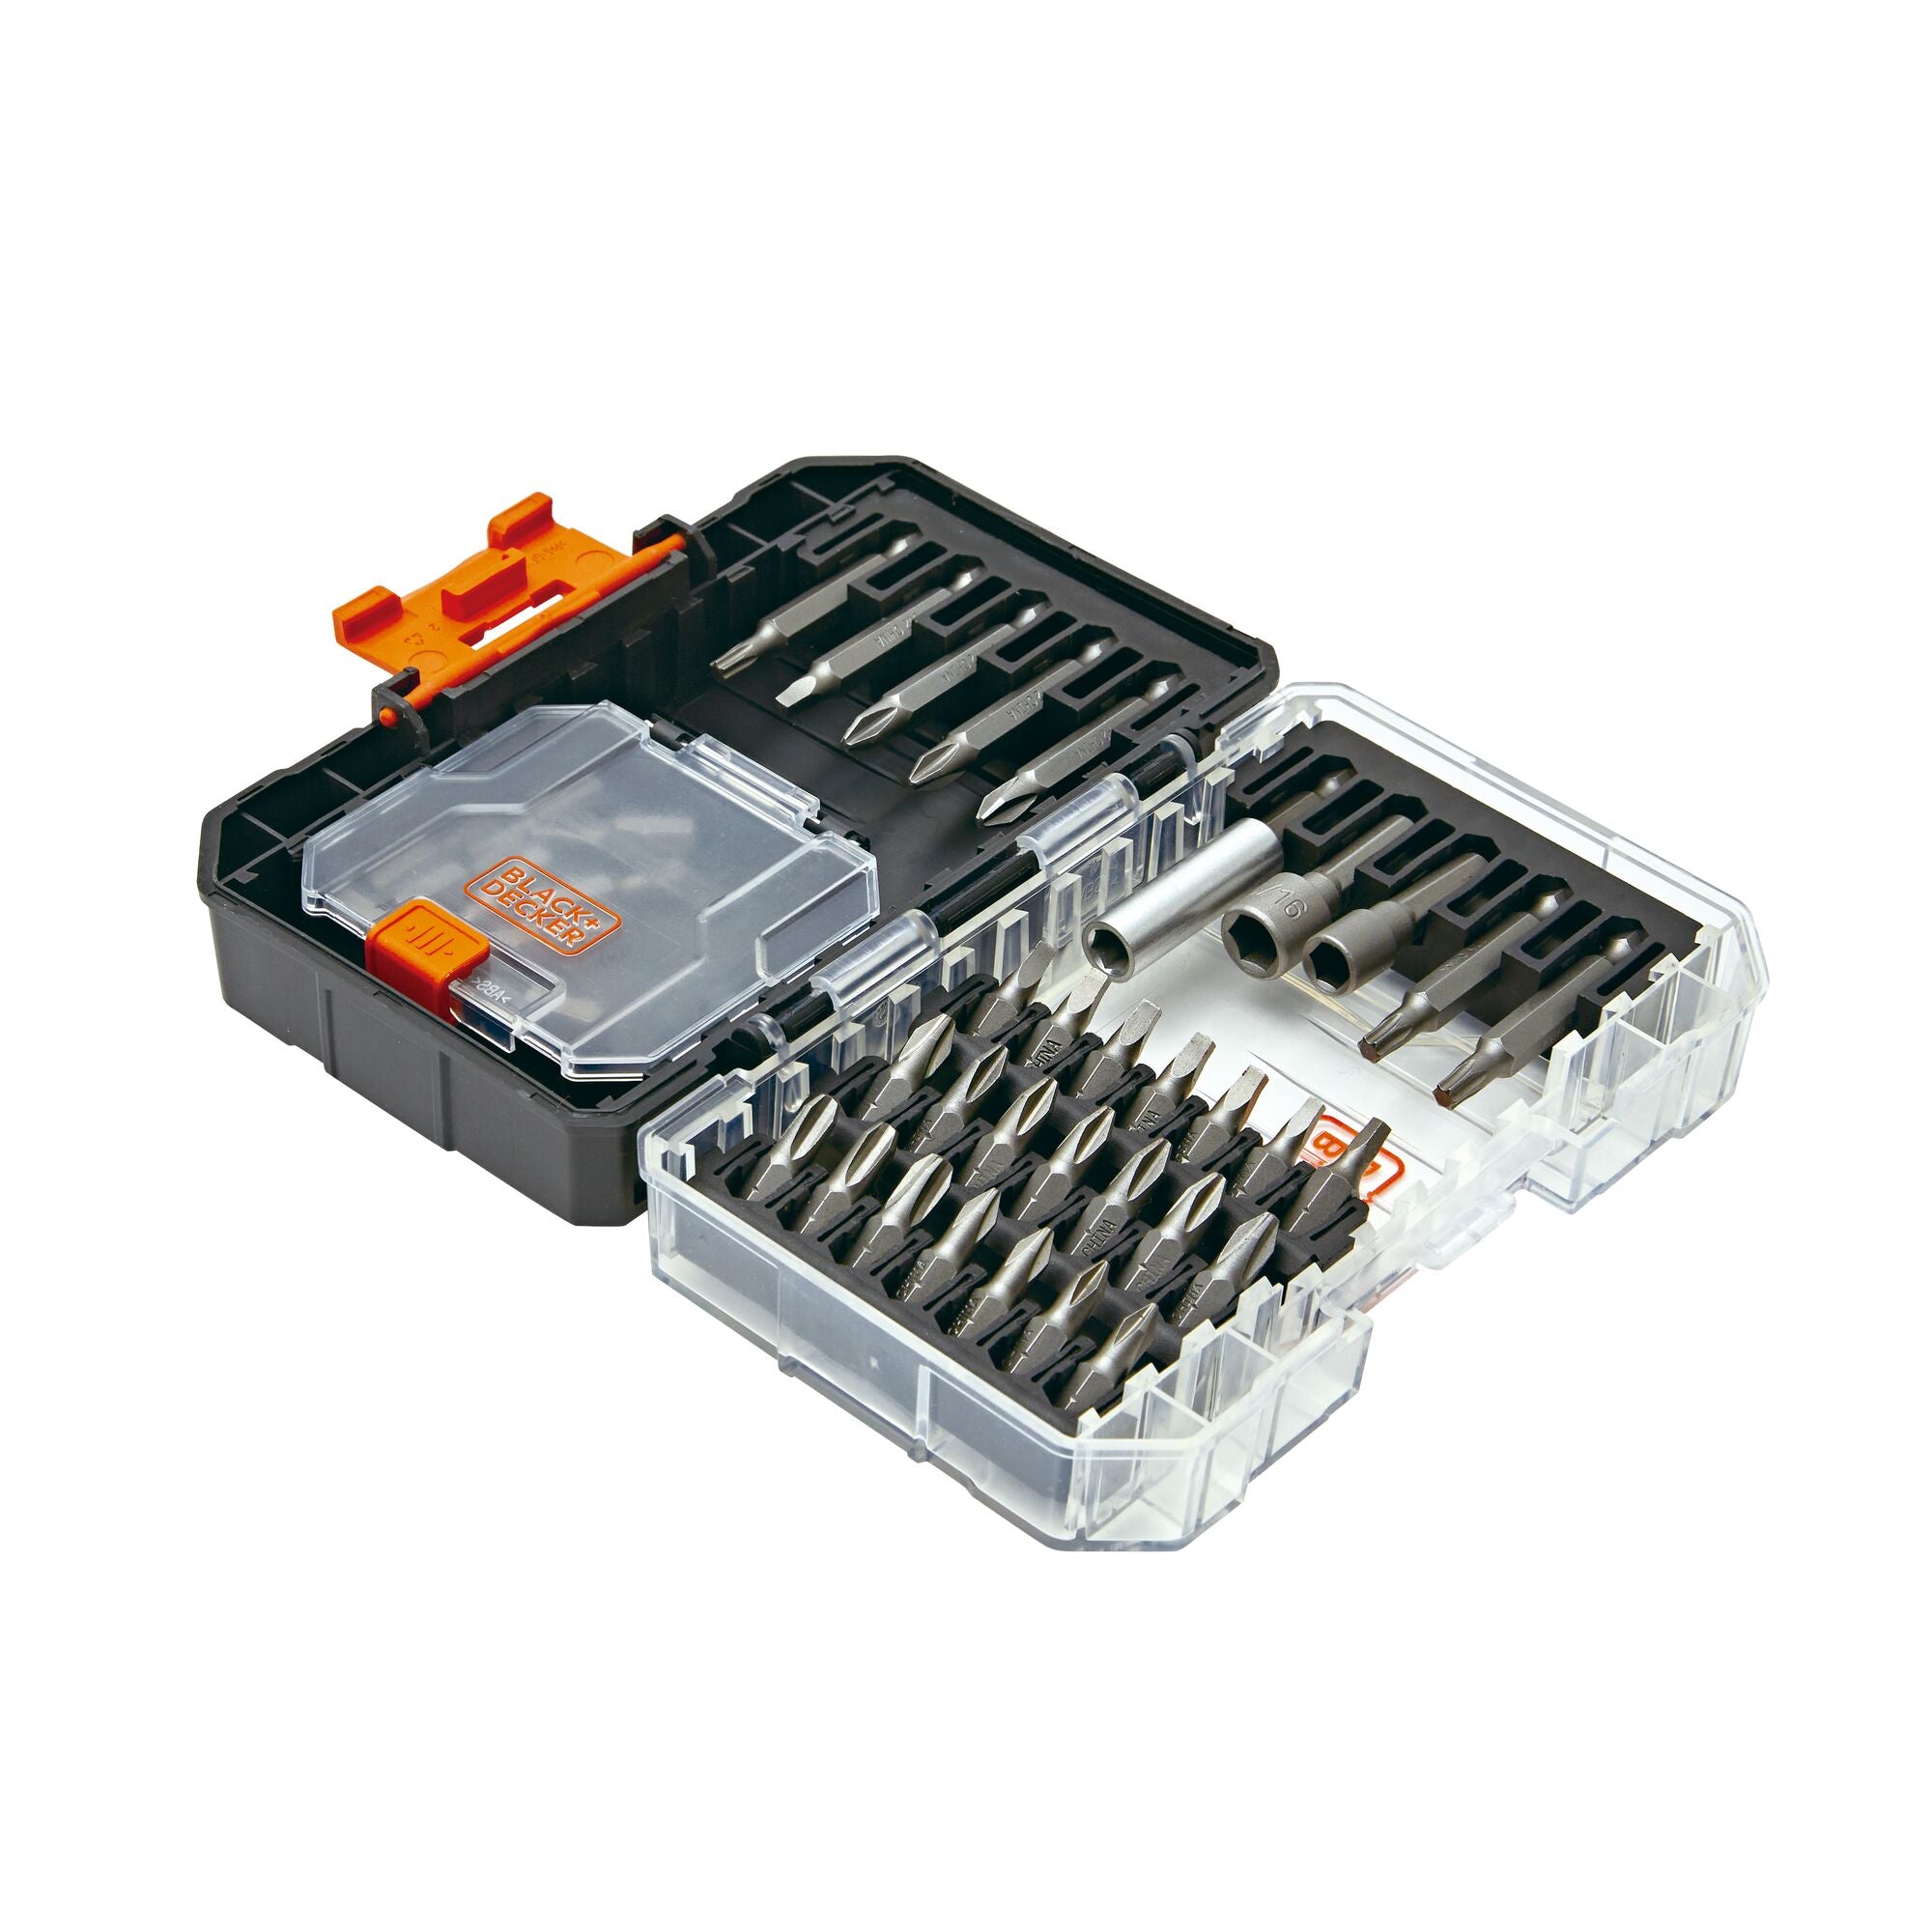 Close up of BLACK+DECKER 40 piece screwdriver set, showing open and closed compartments